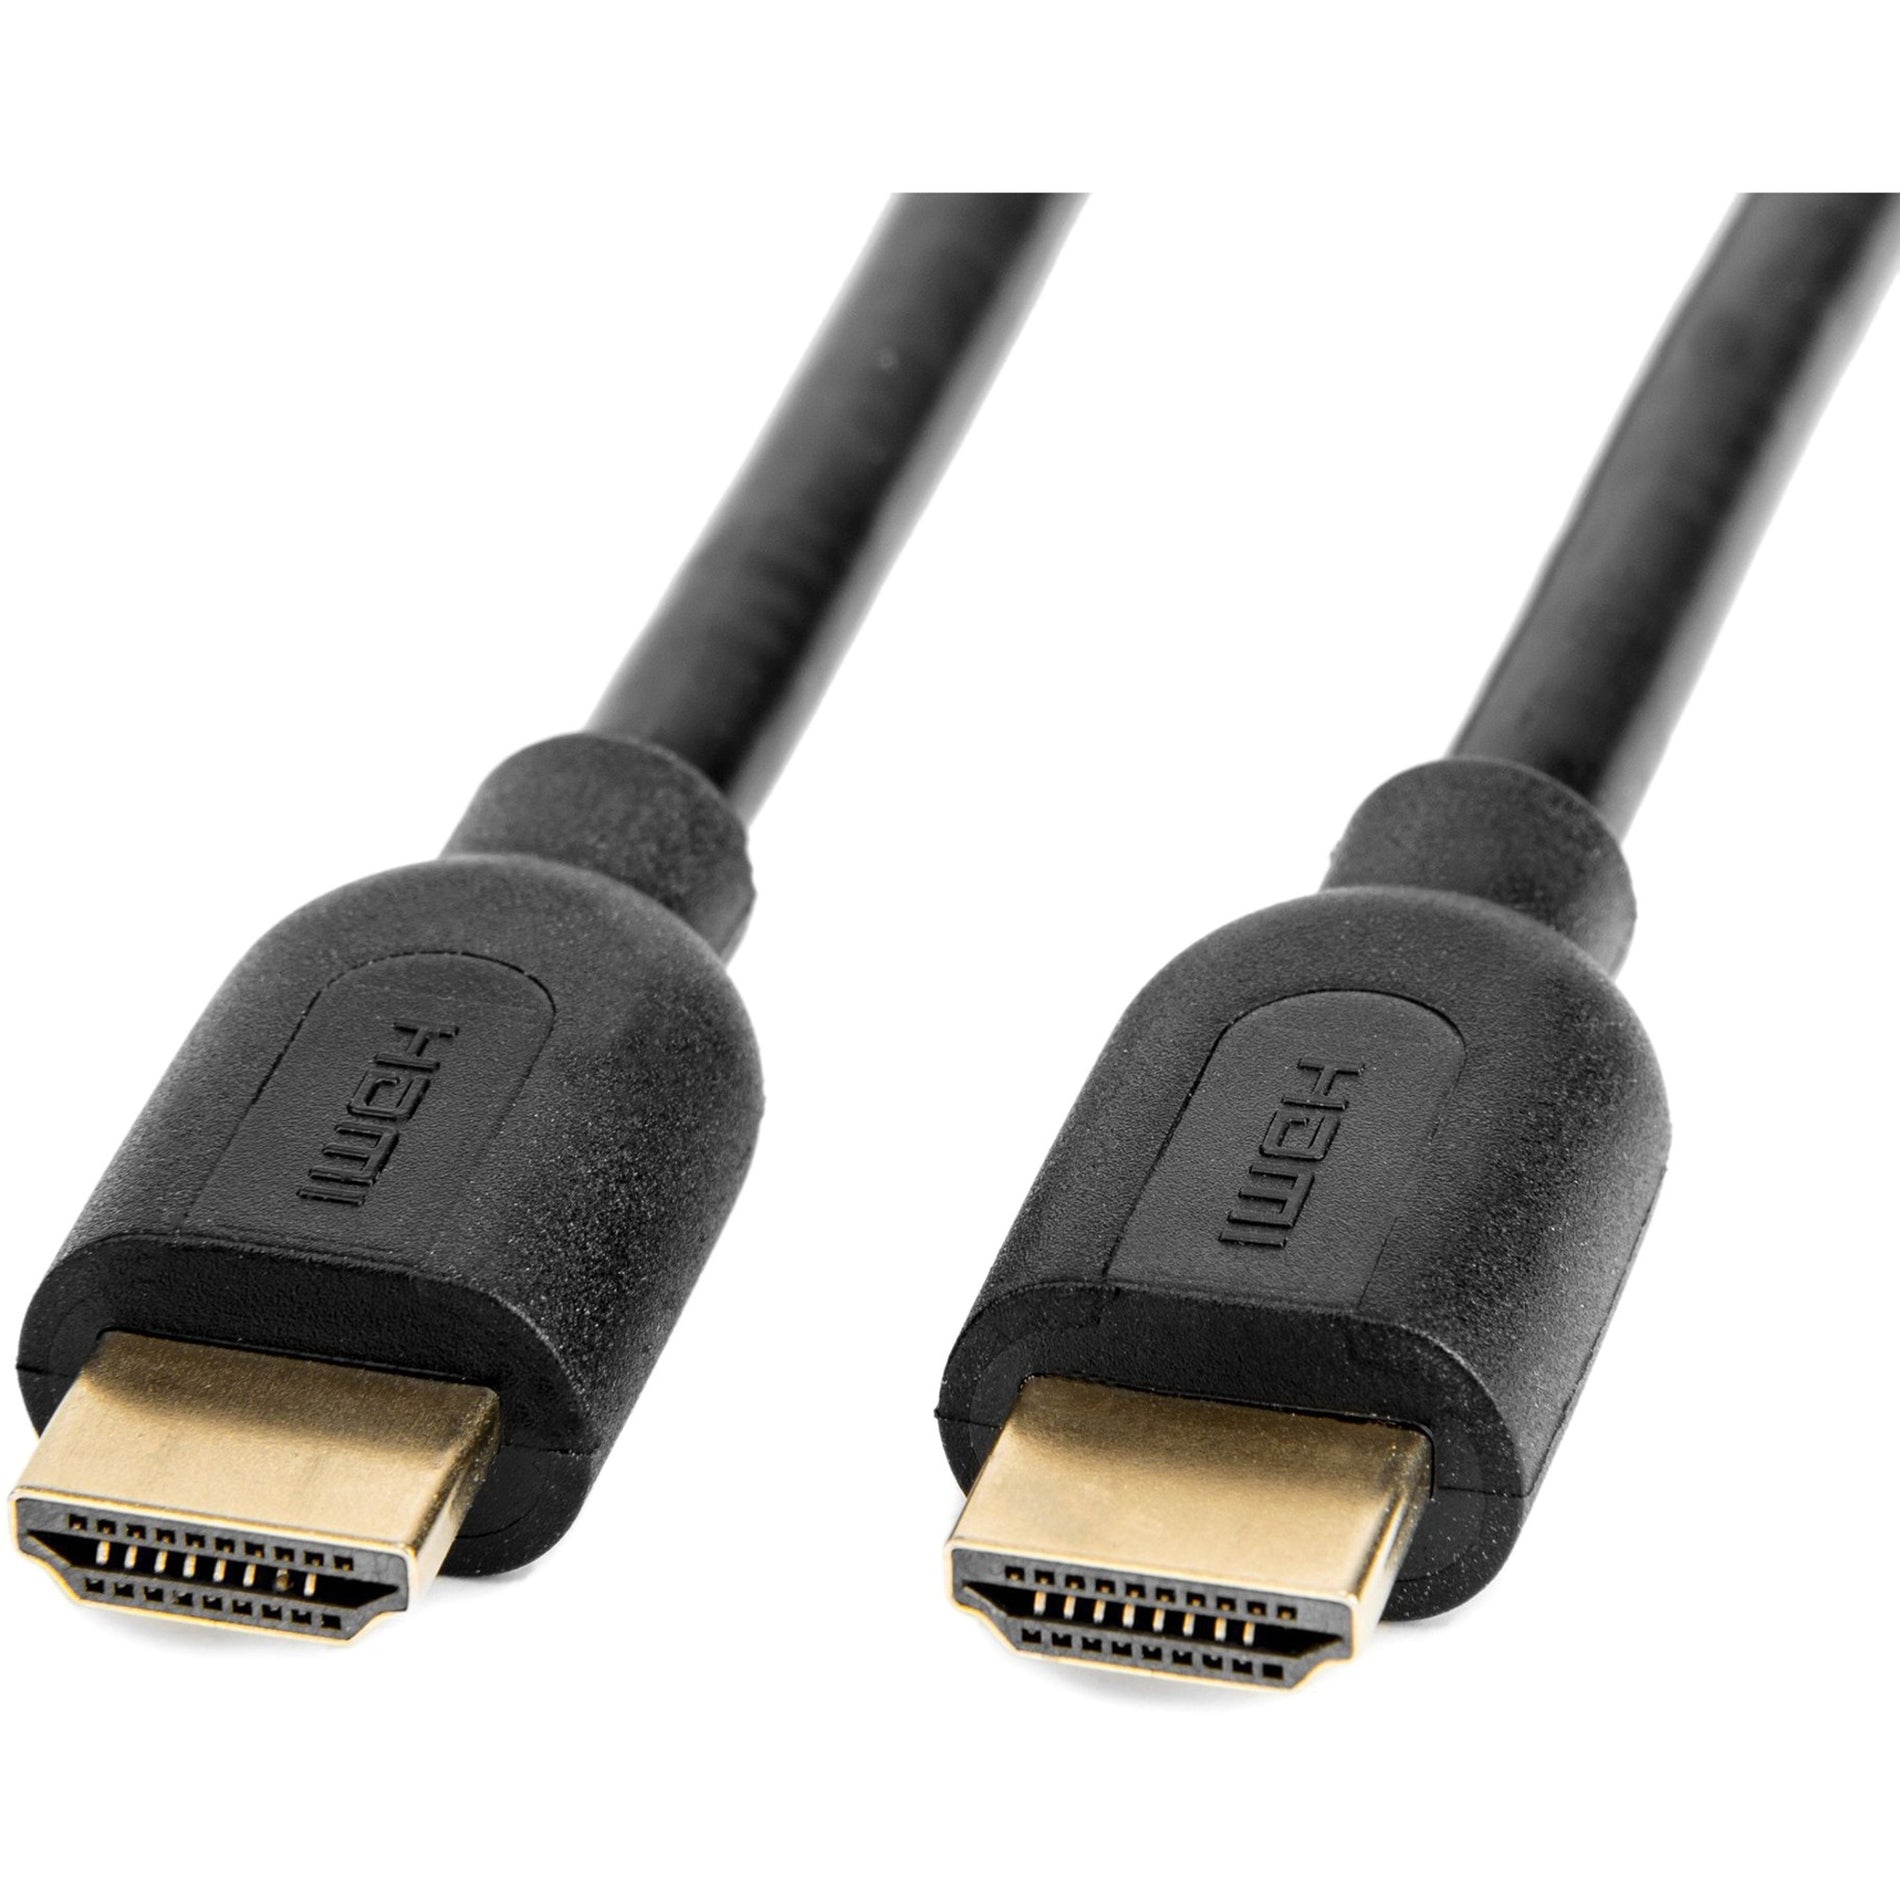 Rocstor Y10C106-B1 Premium High Speed HDMI (M/M) Cable with Ethernet 3-ft, Lifetime Warranty, RoHS Certified